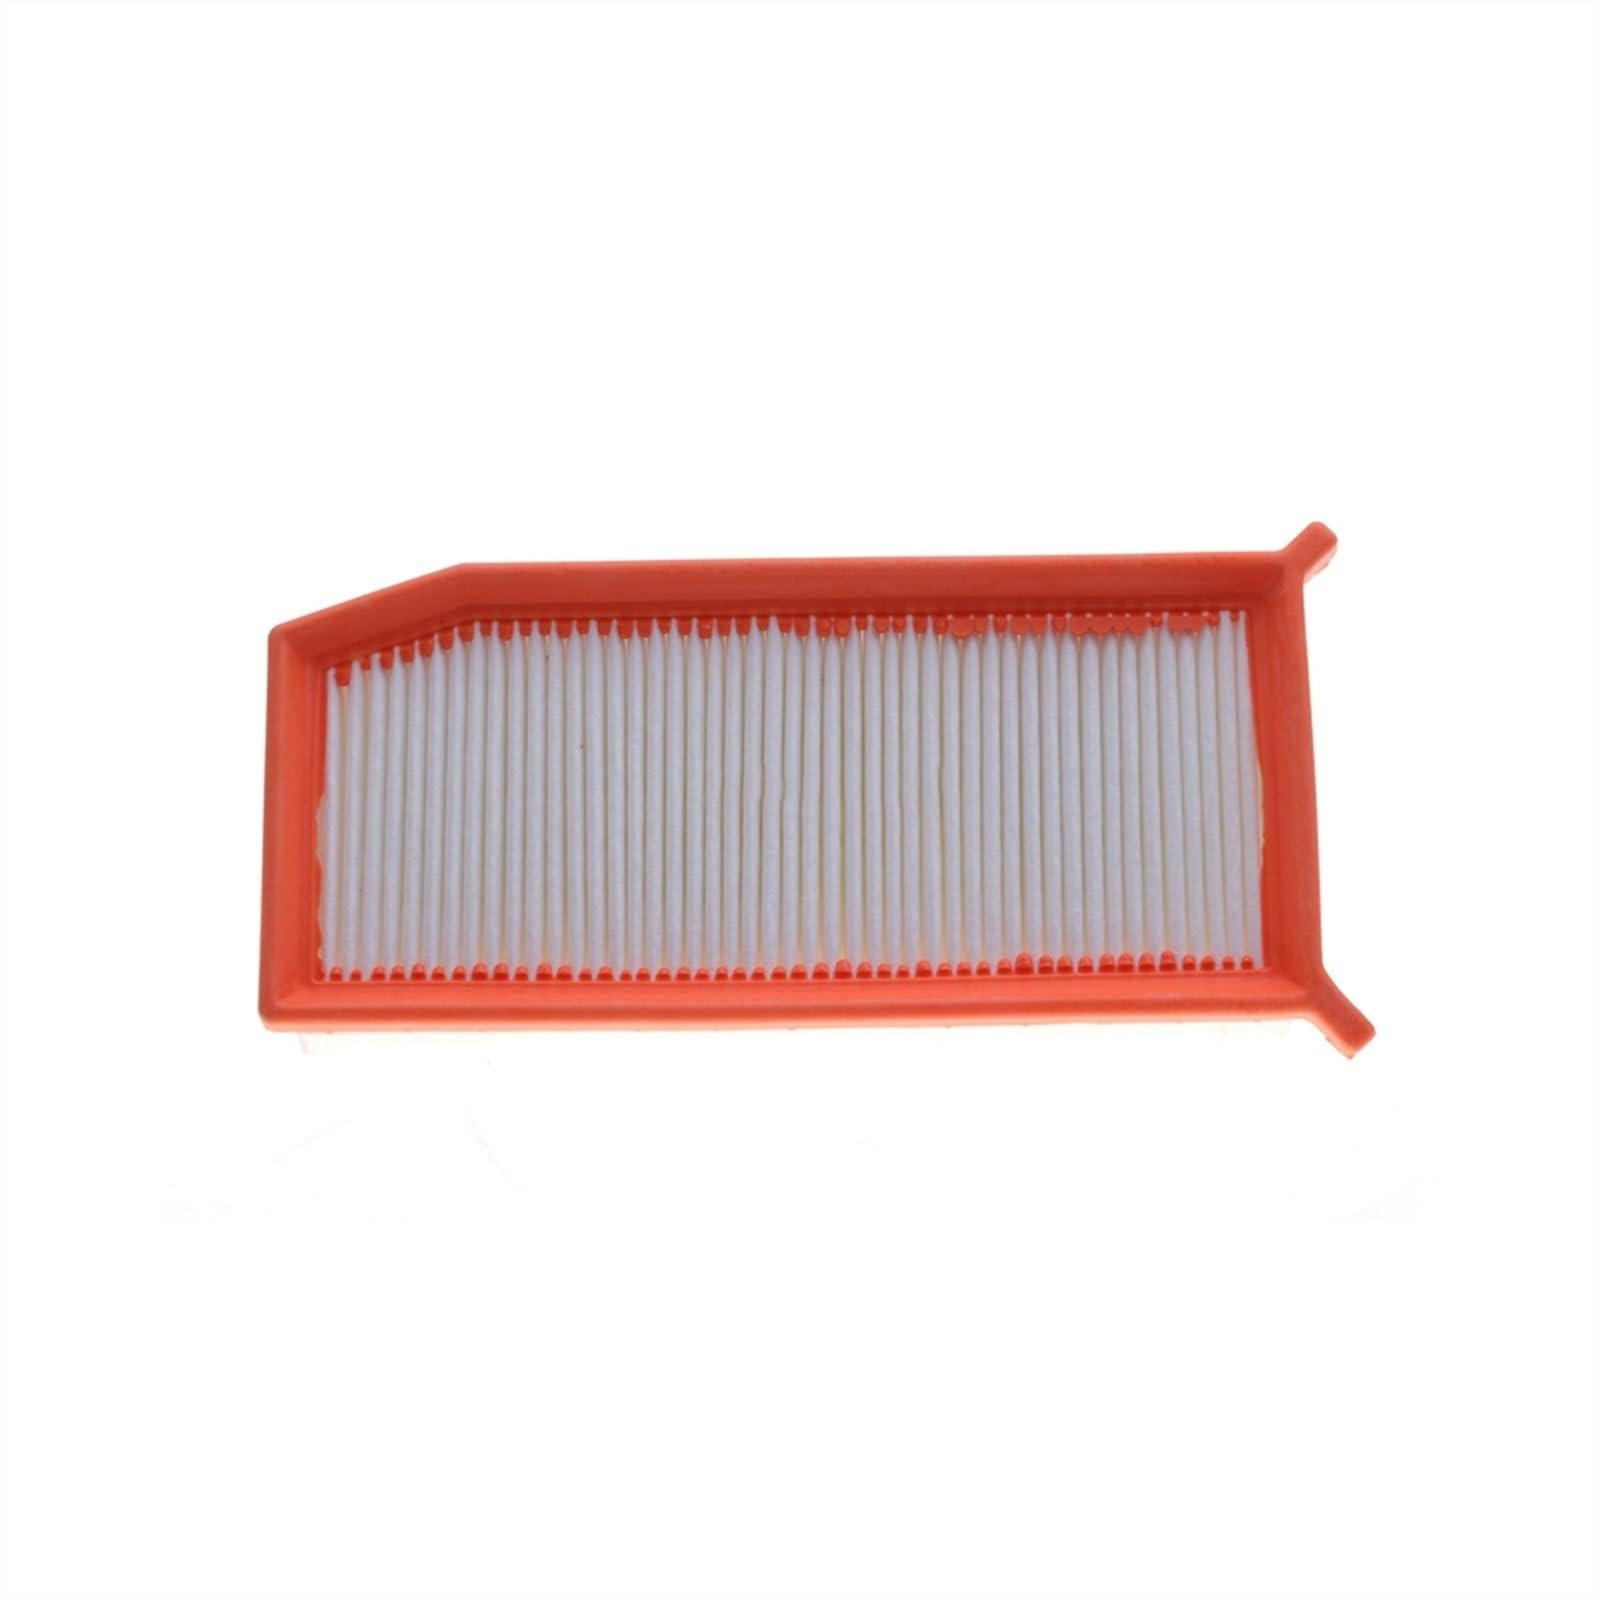 MUEOSI Automotor-Luftfilter, for Renault, Captur CLIO IV, for NISSAN, for Qashqai, for Dacia, DOKKER DUSTER LODGY LOGAN SANDERO II 1.2T 1.5T 165467674R Autoluftfilter von MUEOSI